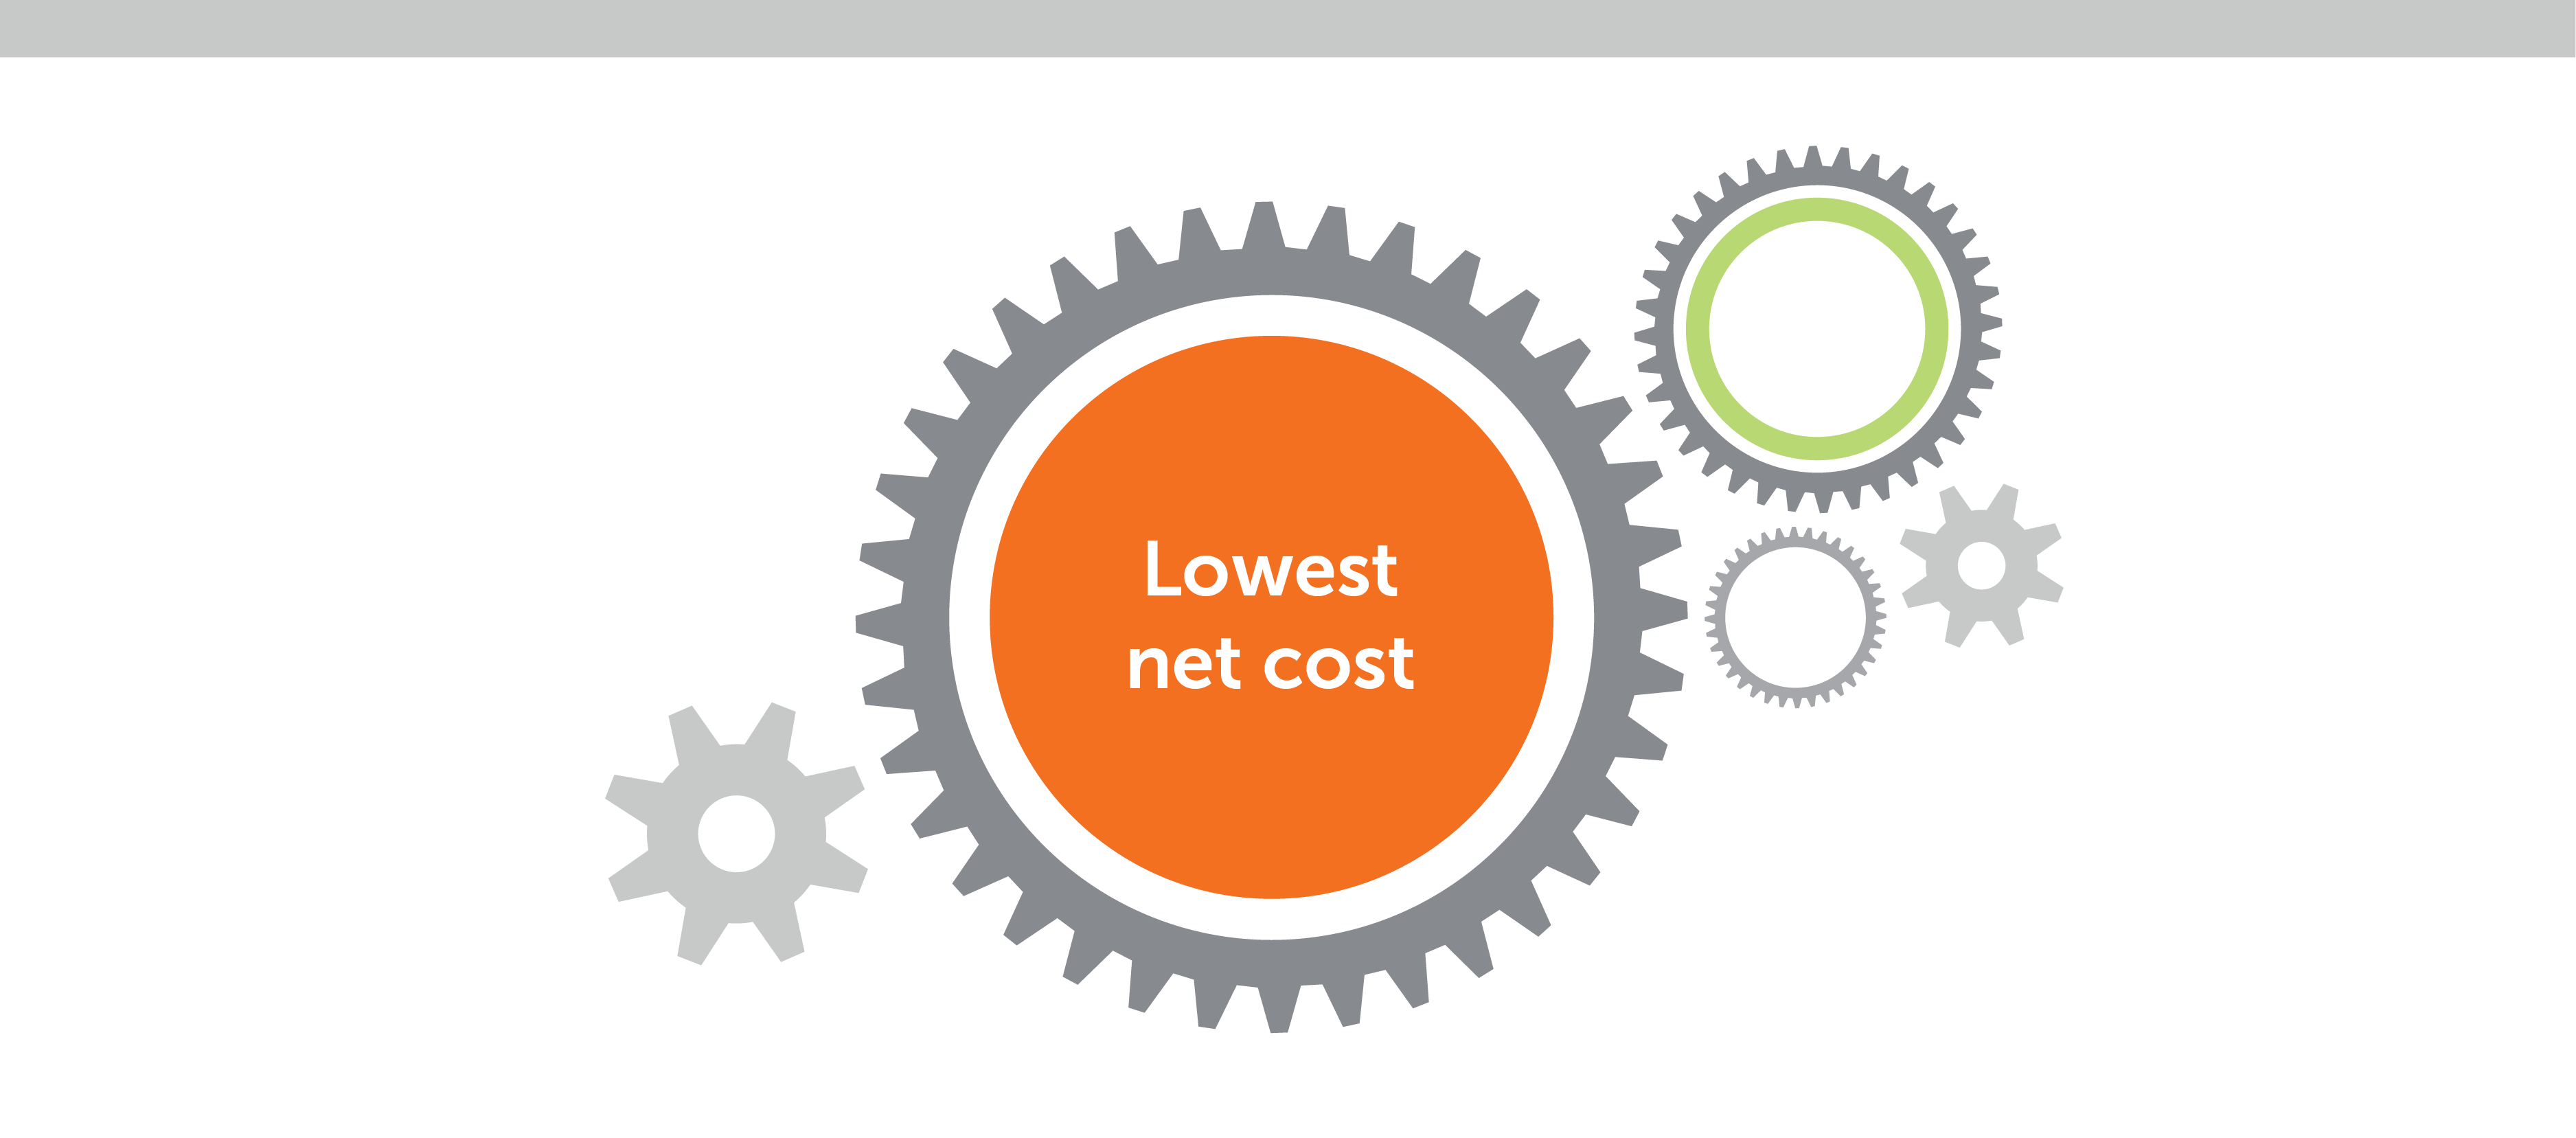 Illustrated cogs float against a white backdrop among the words “Lowest net cost.”